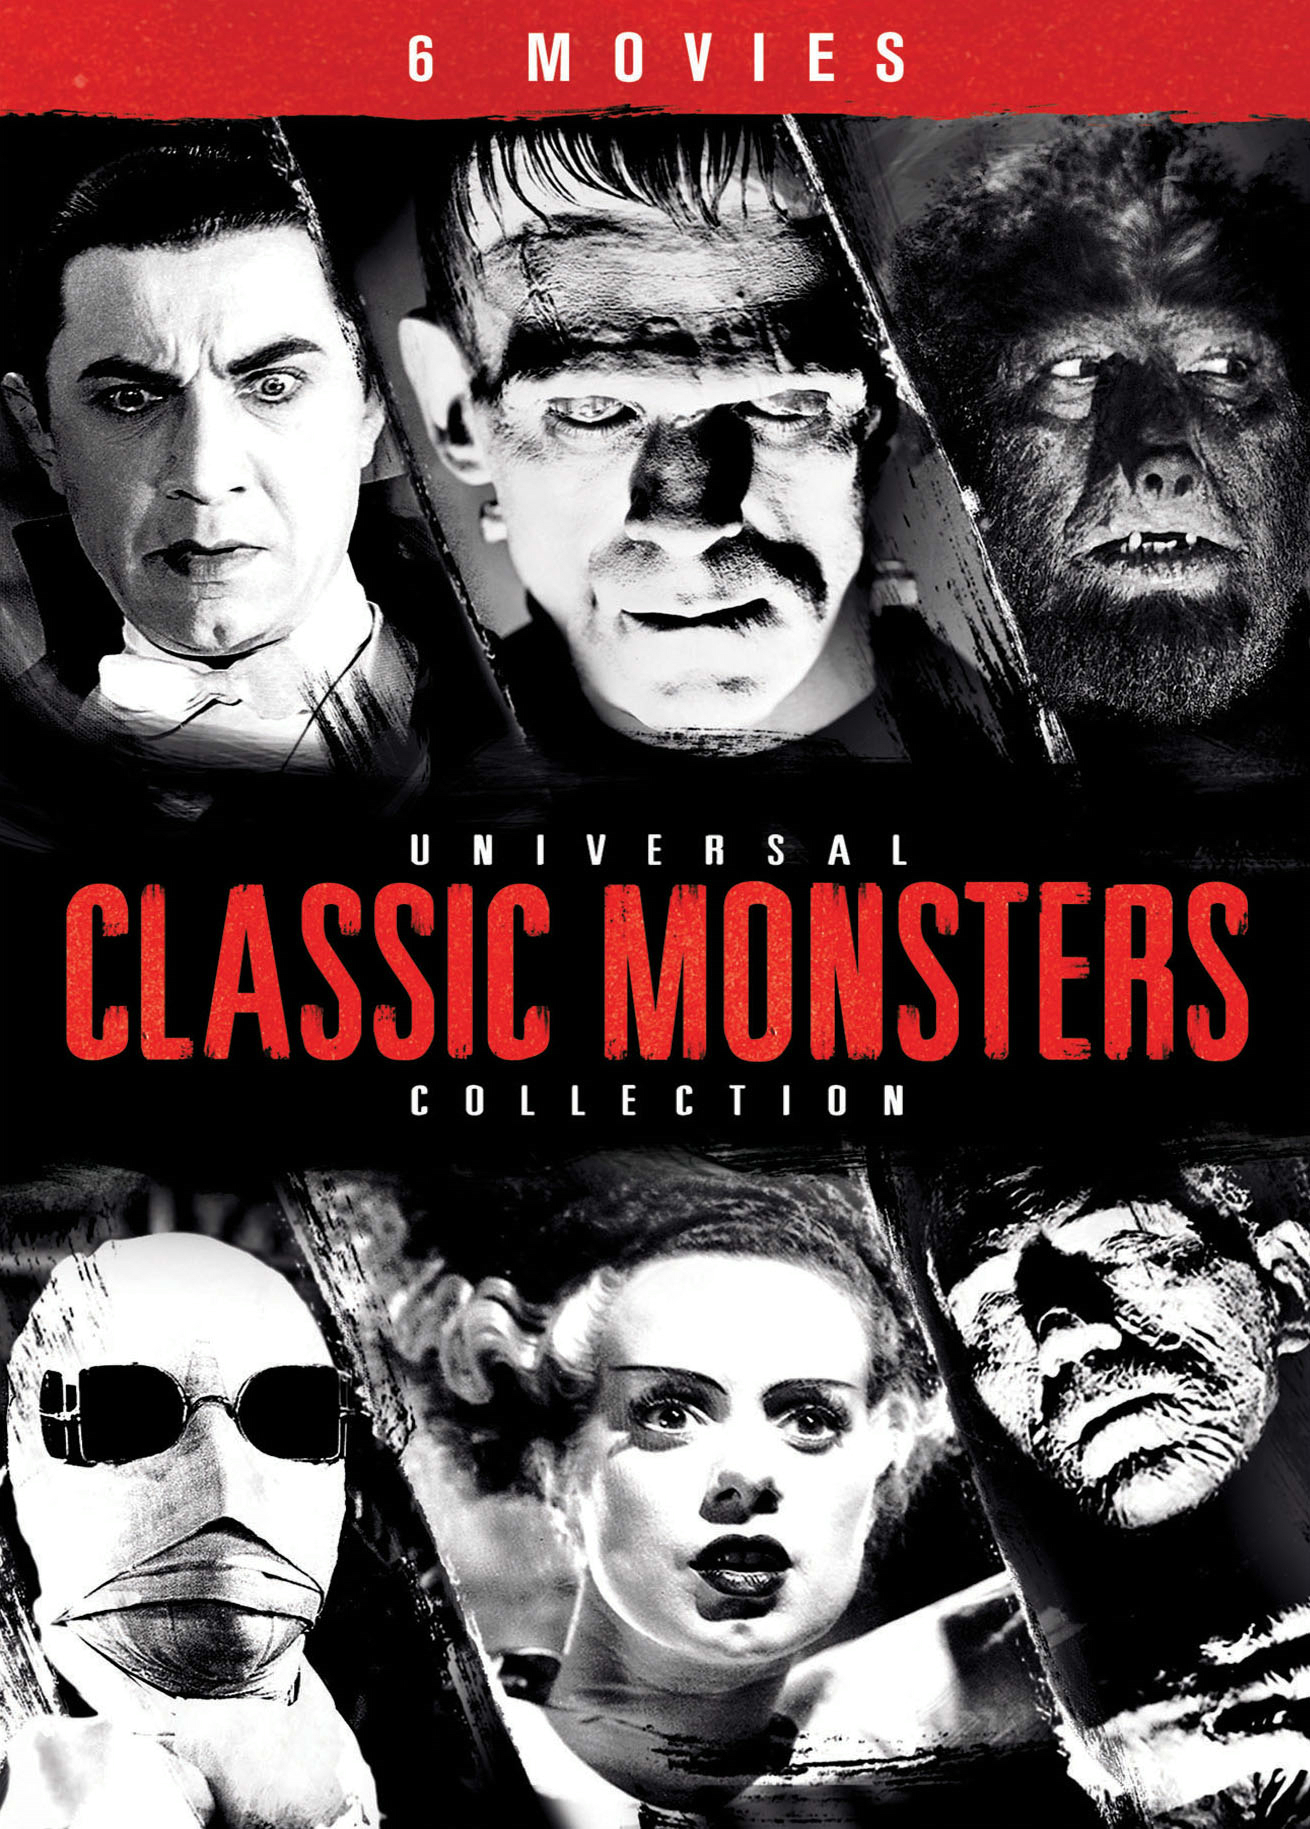 Universal Classic Monsters Collection (Box Set) - DVD   - Horror Movies On DVD - Movies On GRUV